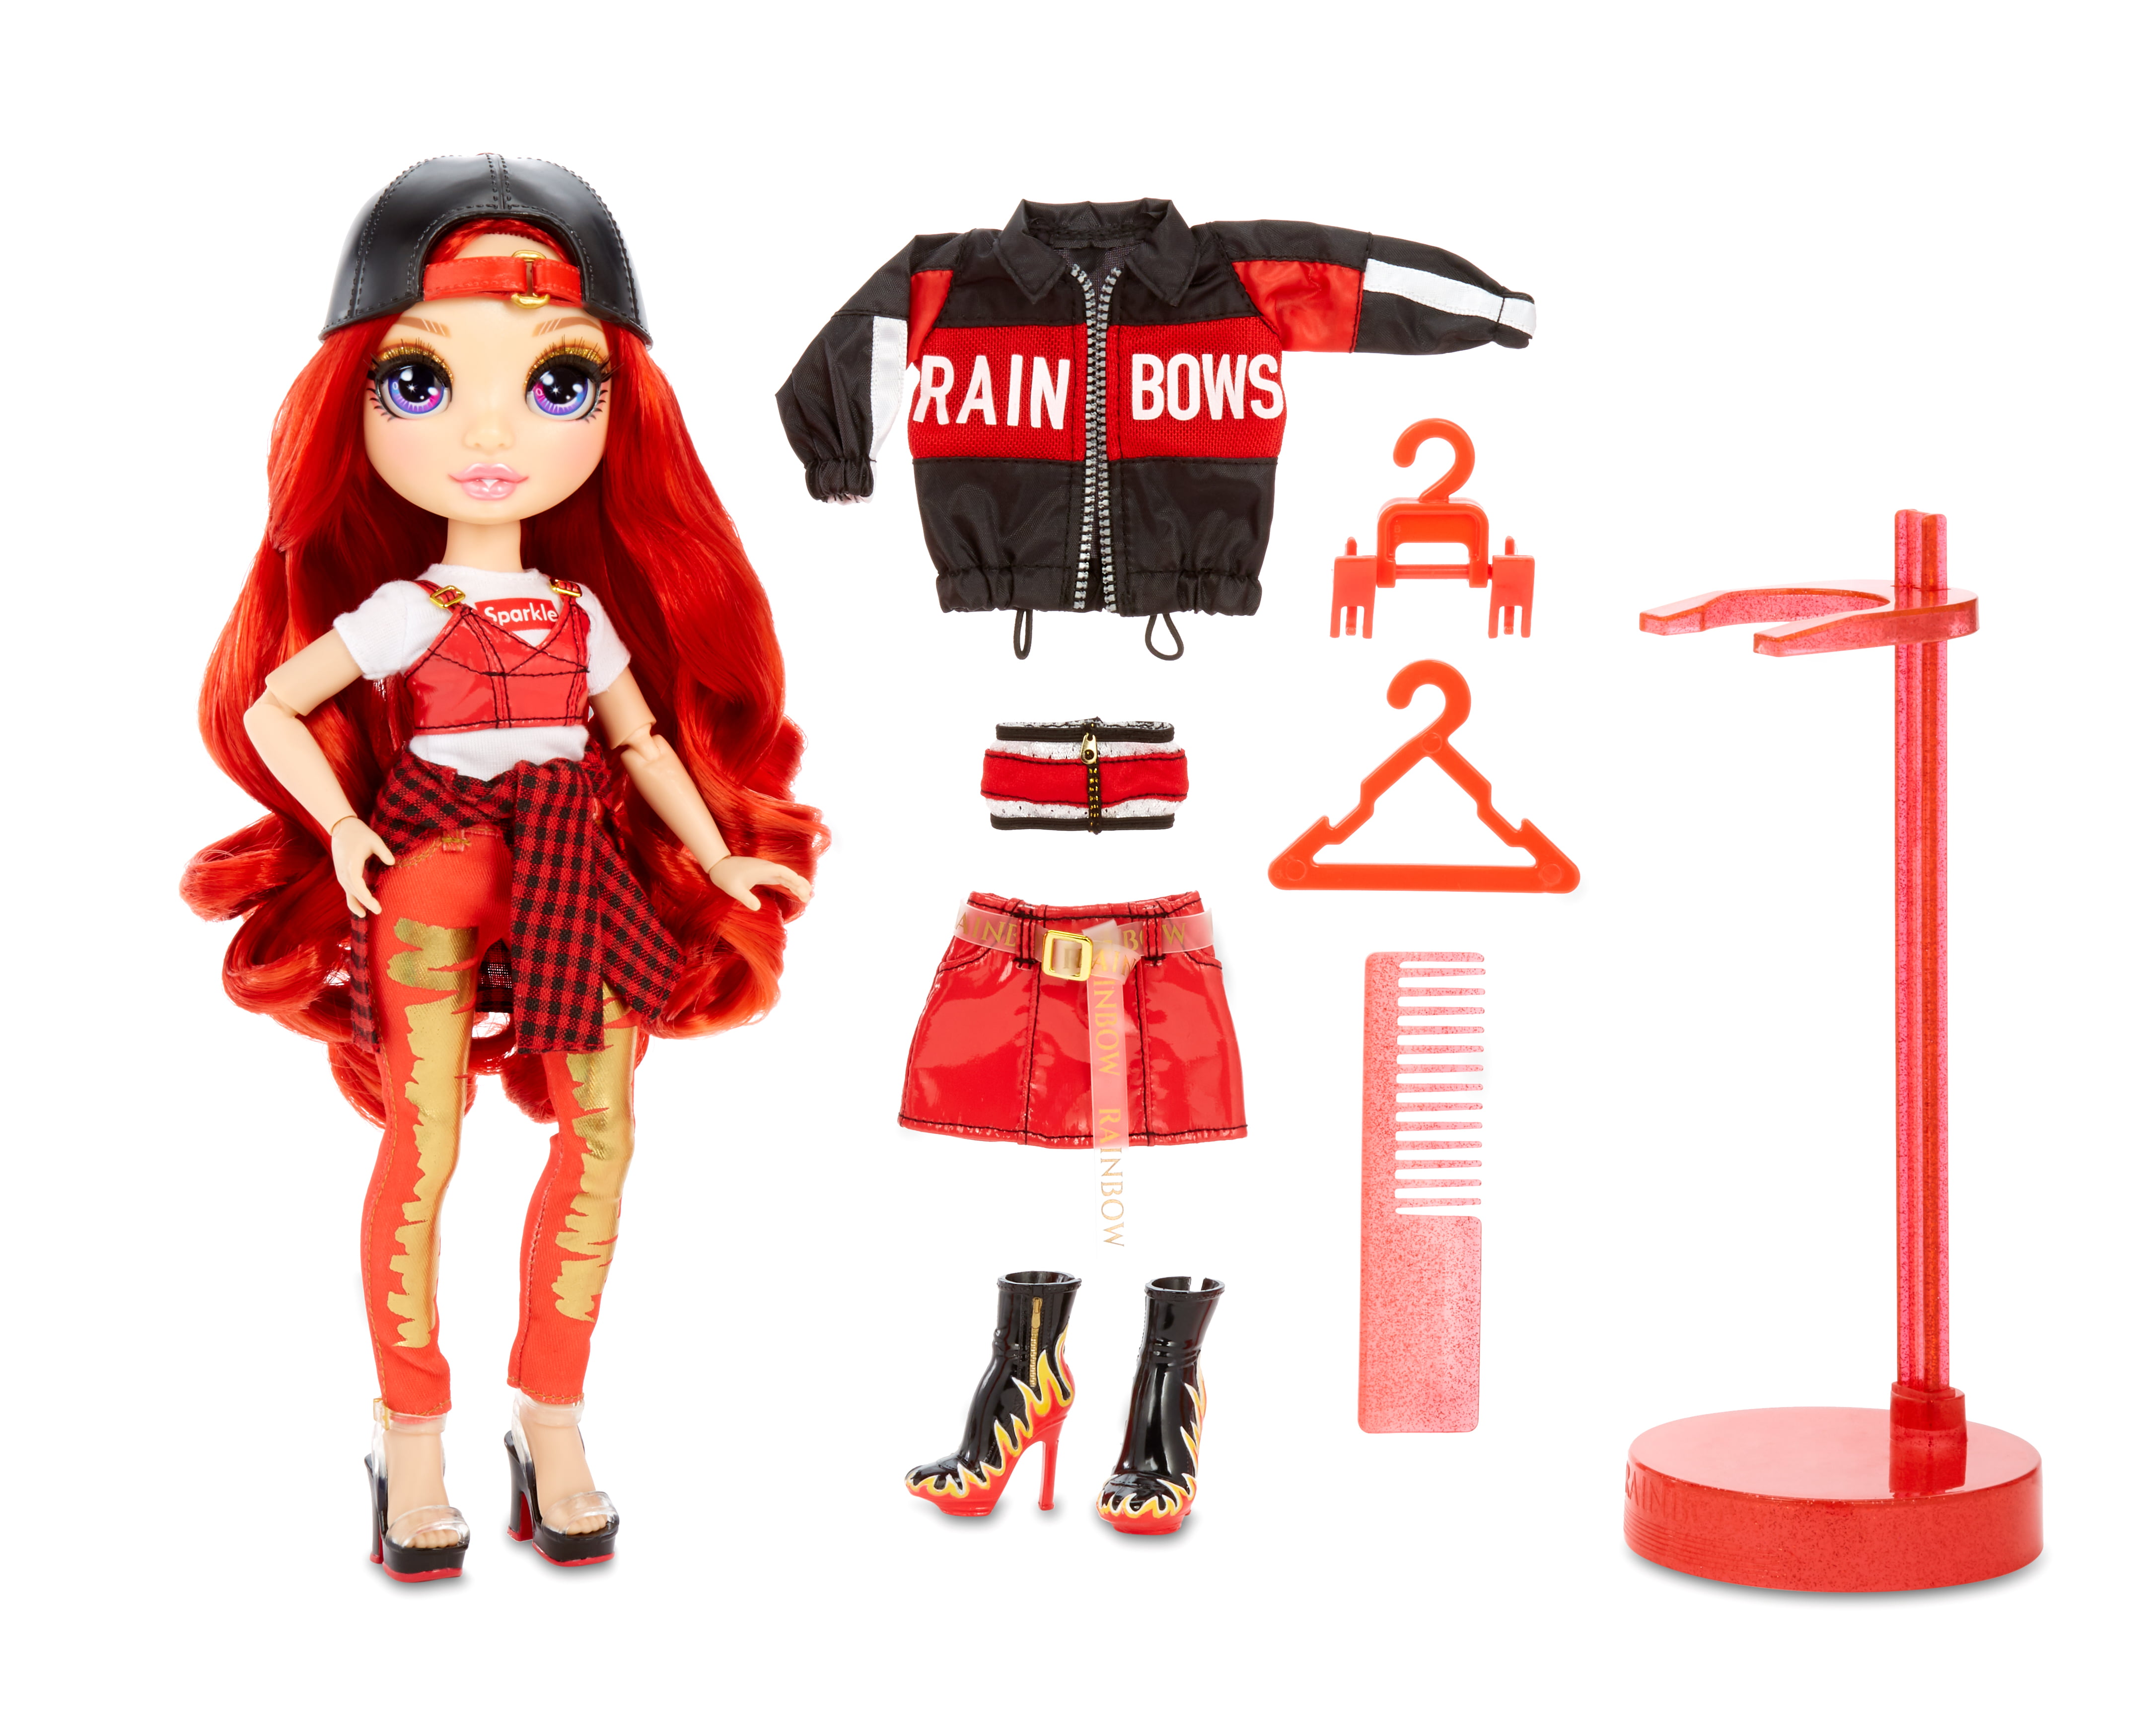 Red Cheerleader Fashion Doll With 2 Pom Poms for sale online Rainbow High Cheer Ruby Anderson 